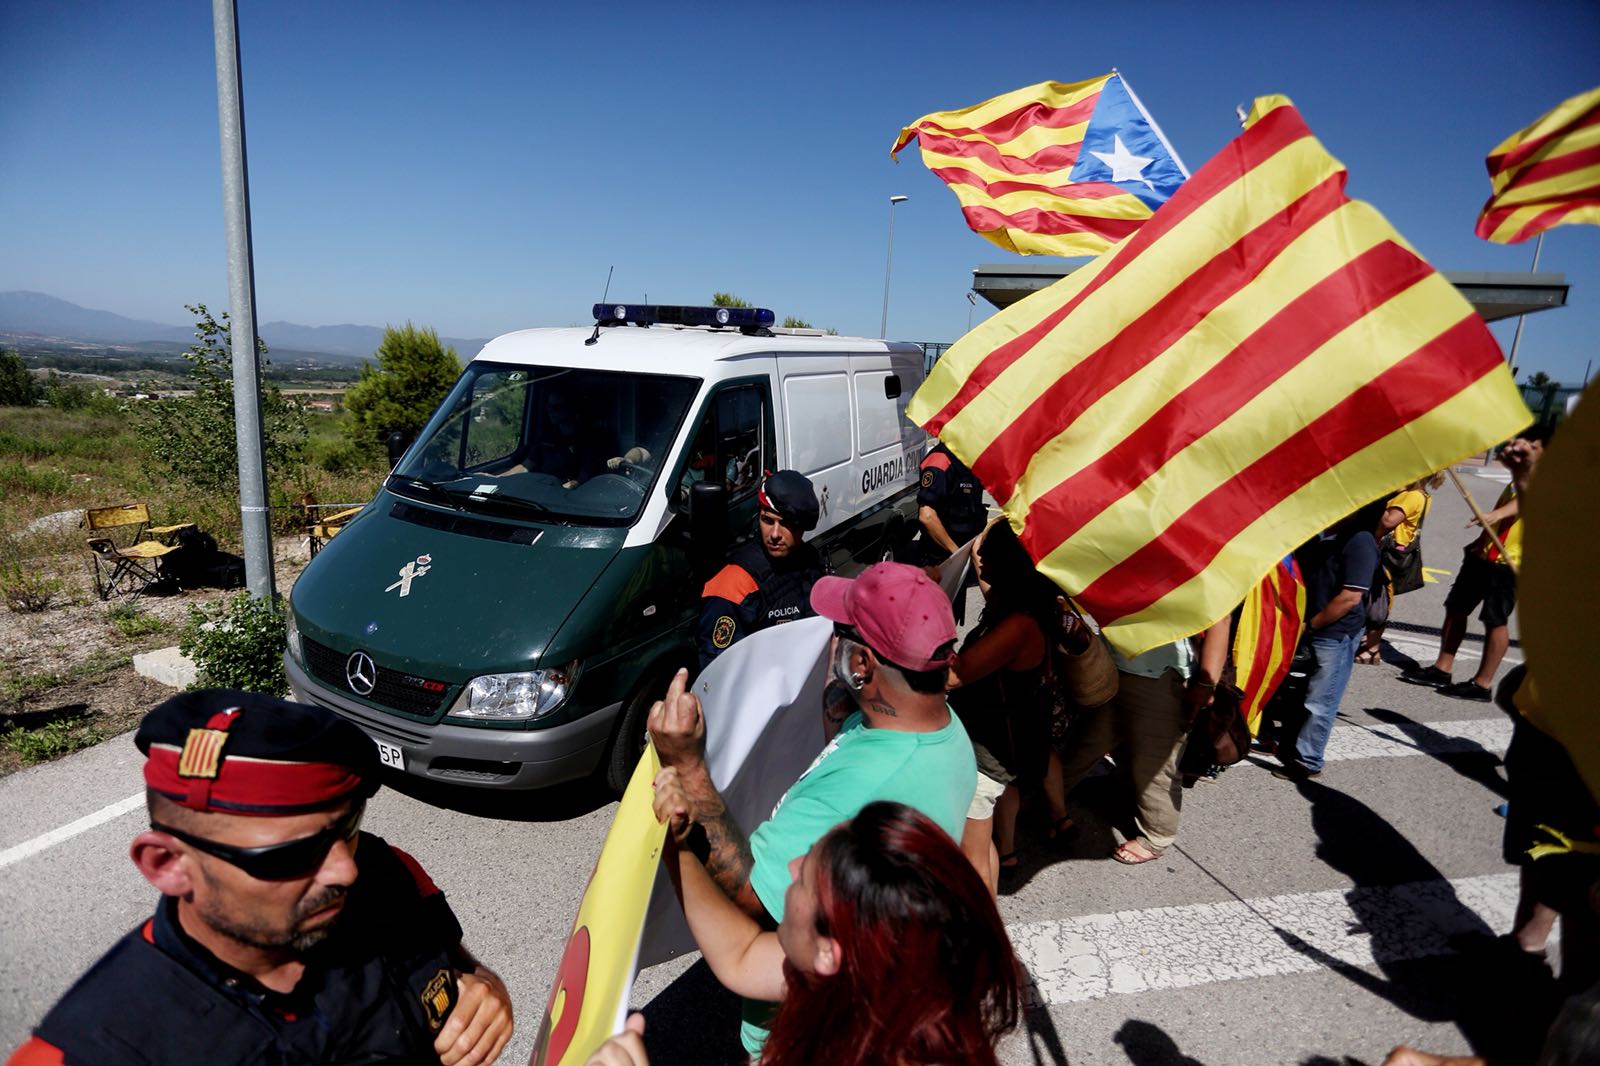 Female political prisoners Forcadell and Bassa arrive at Figueres prison